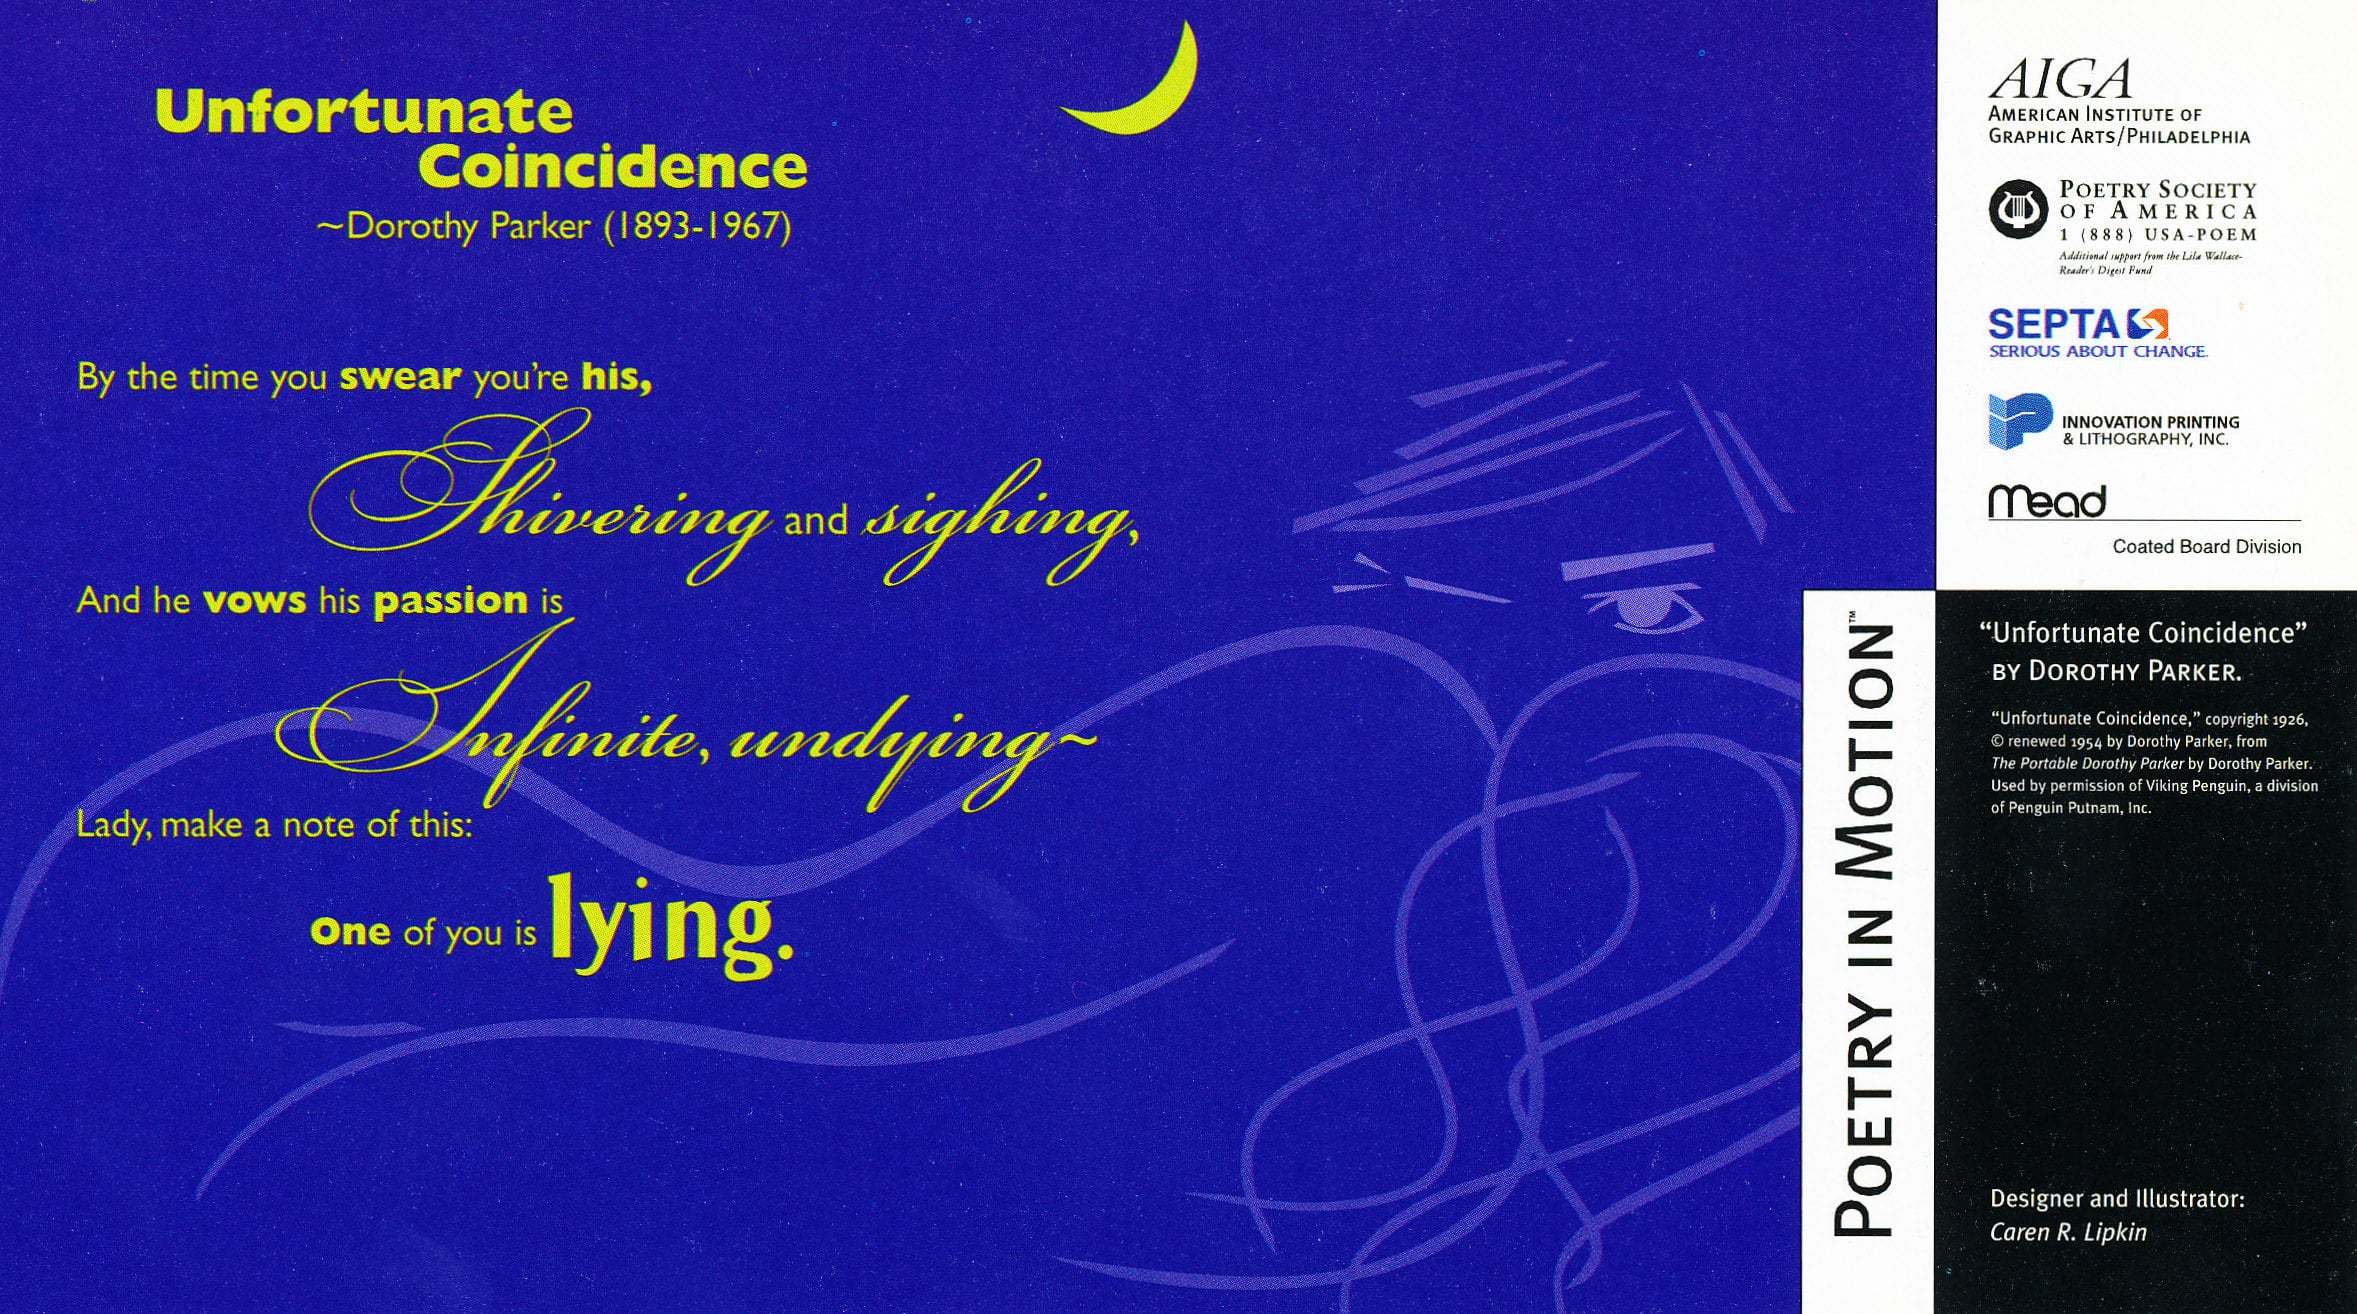 A blue horizontal poster with a yellow crescent moon features the poem Unfortunate Coincidence, by Dorothy Parker.